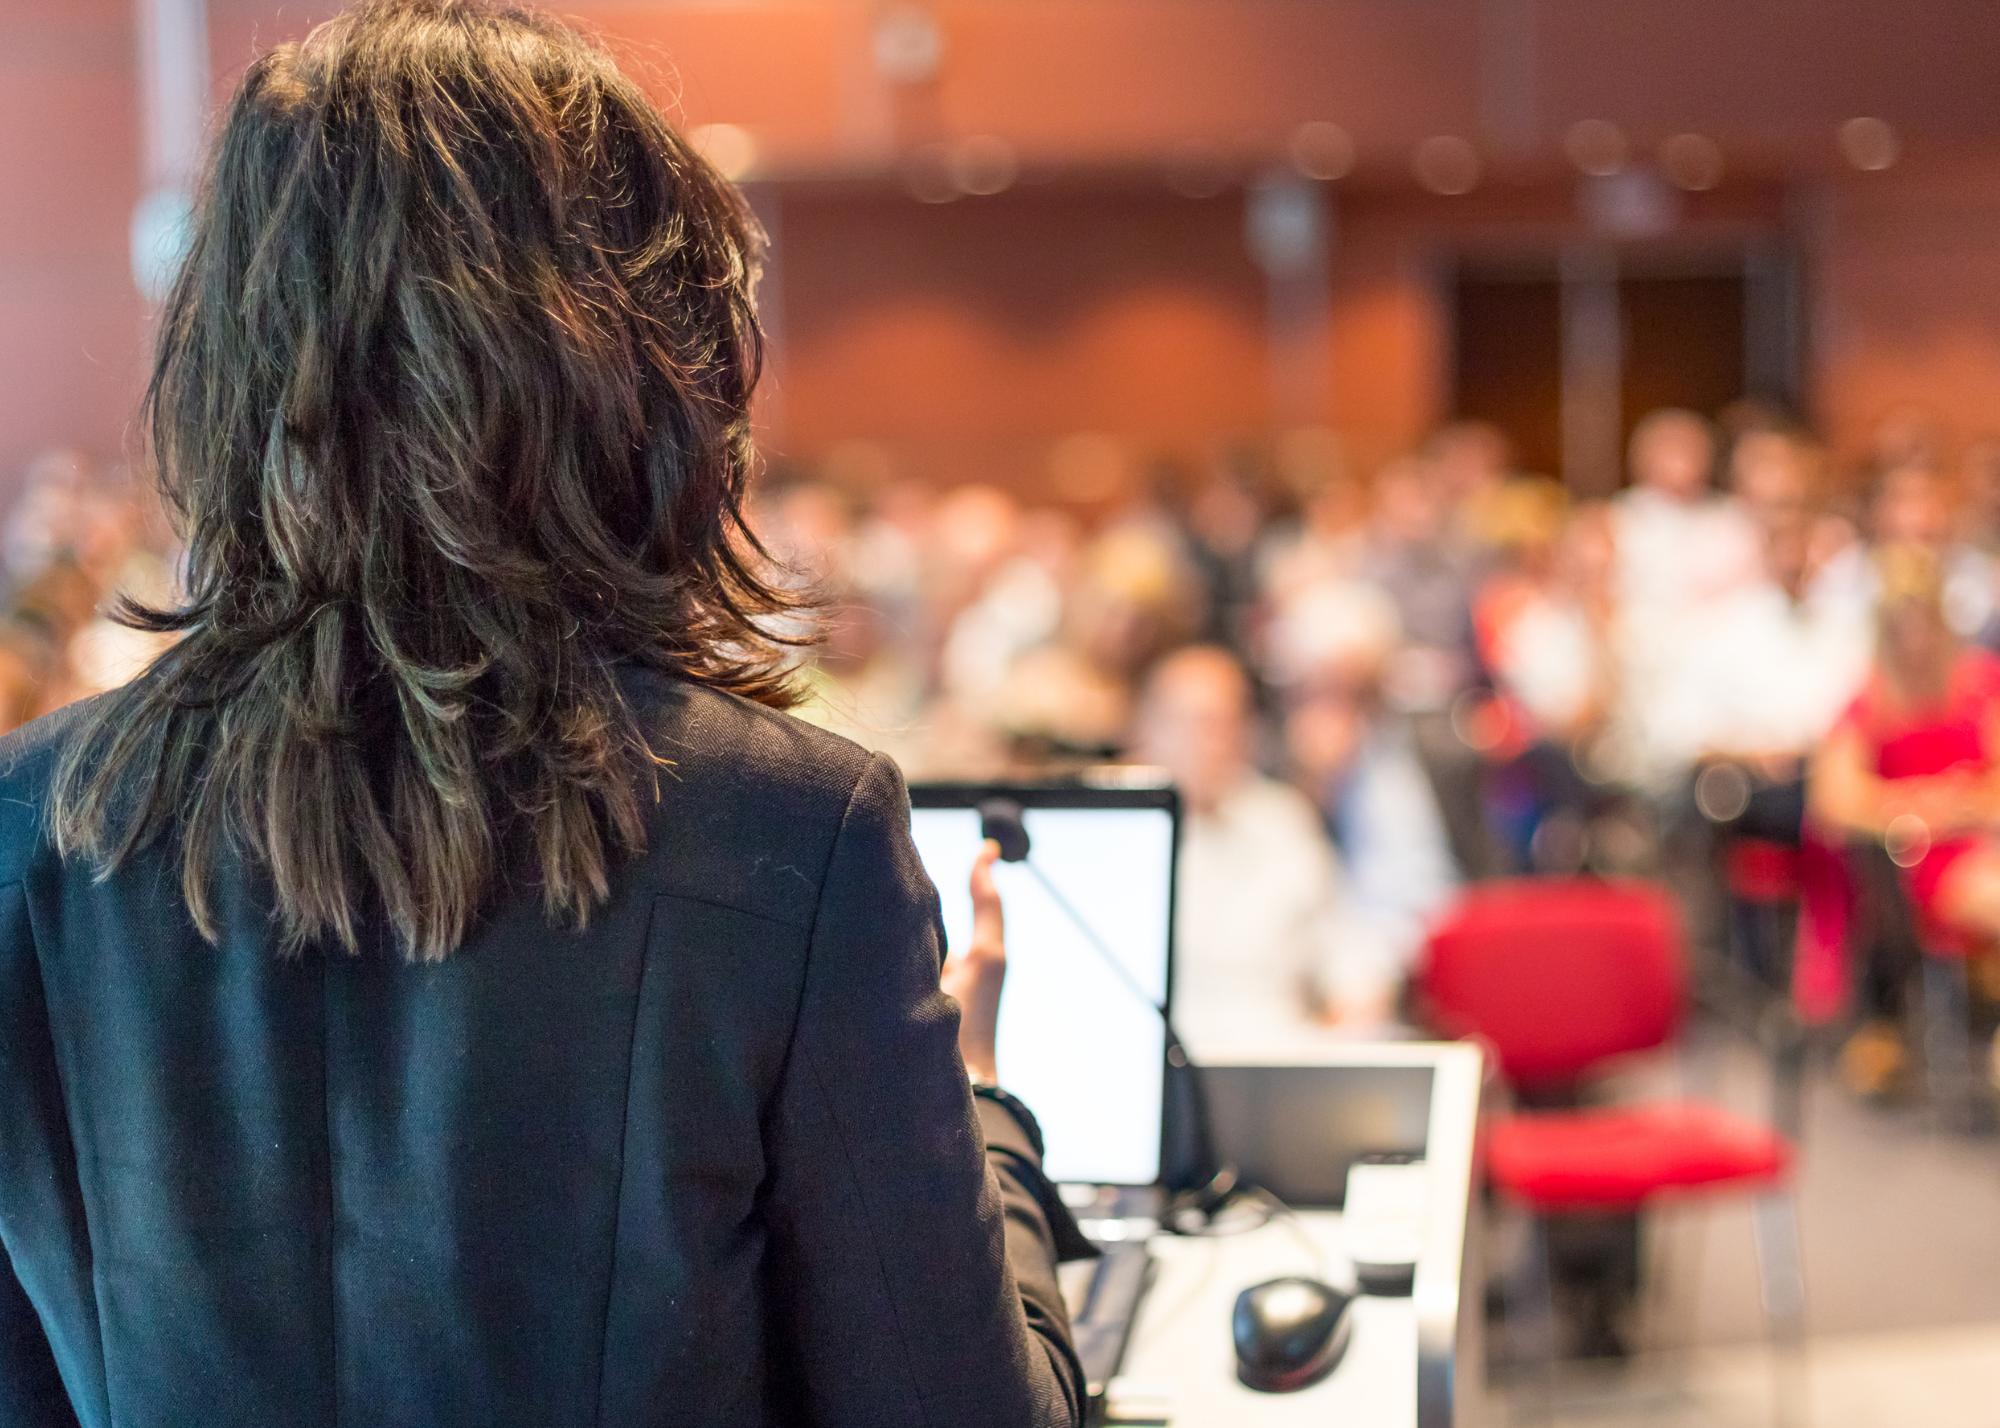 5 Things to Know to Be a Highly Effective Public Speaker